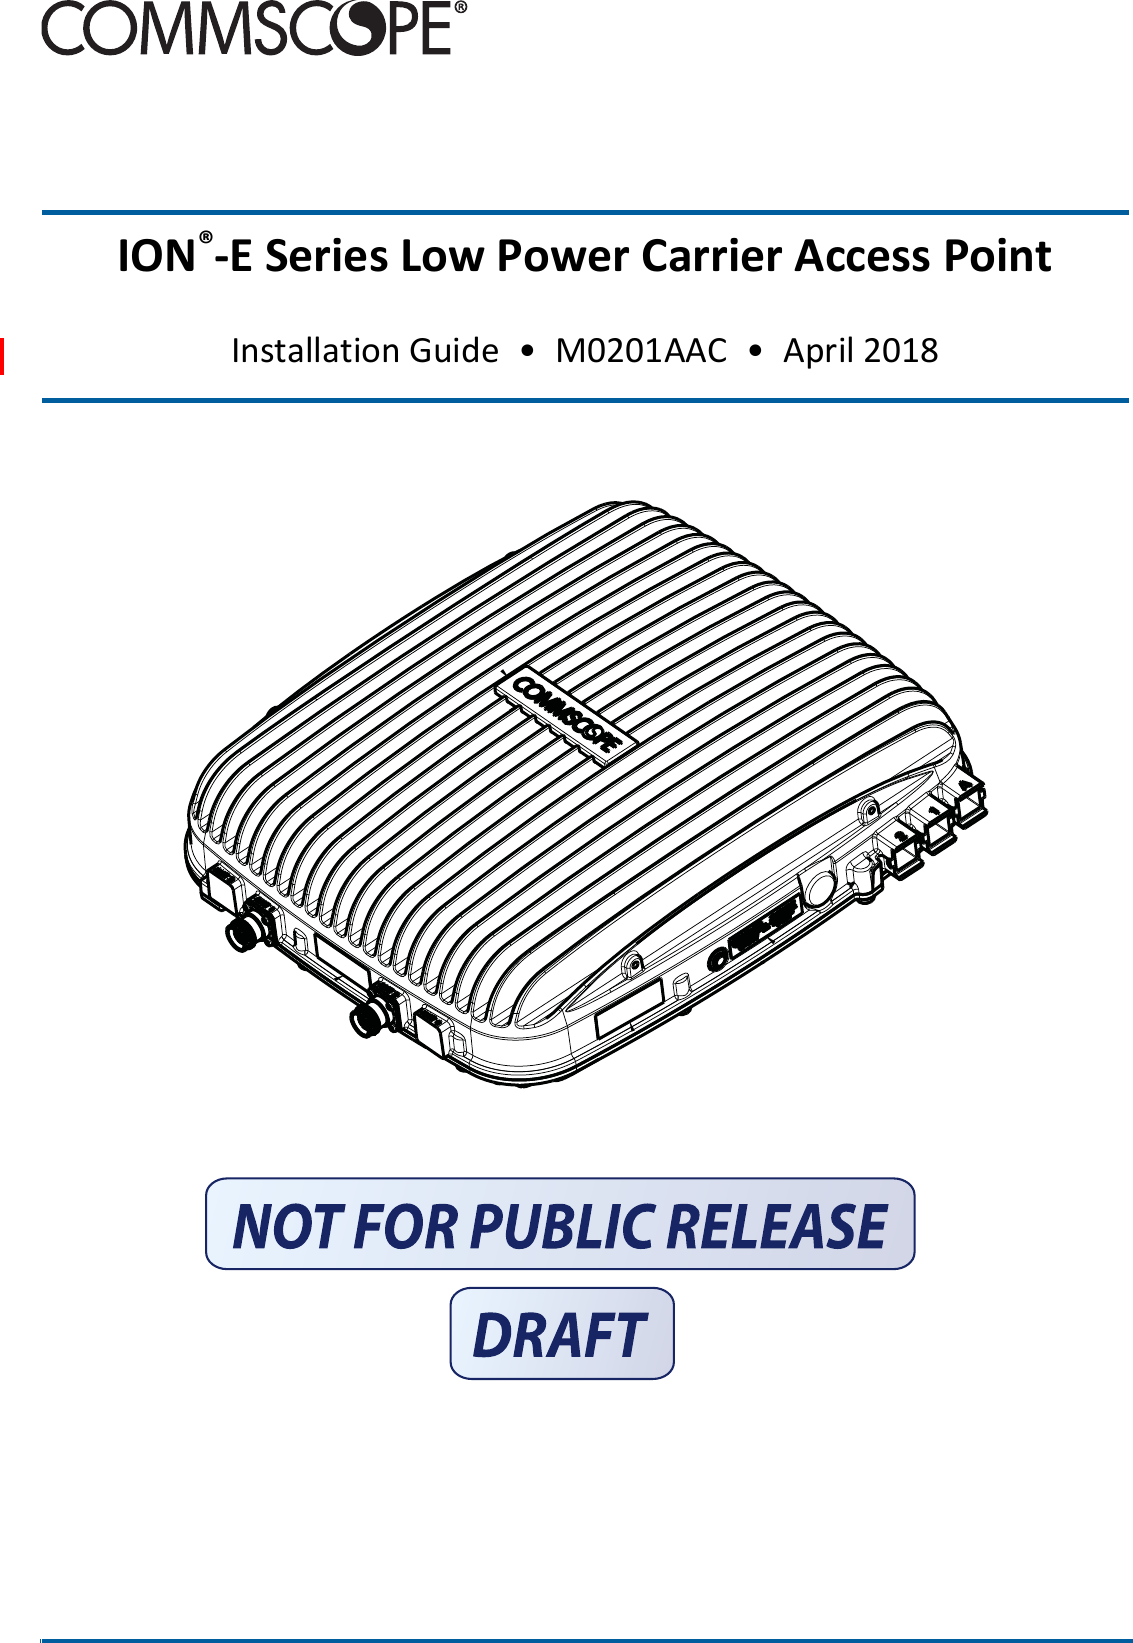  ION®-E Series Low Power Carrier Access PointInstallation Guide  •  M0201AAC  •  April 2018